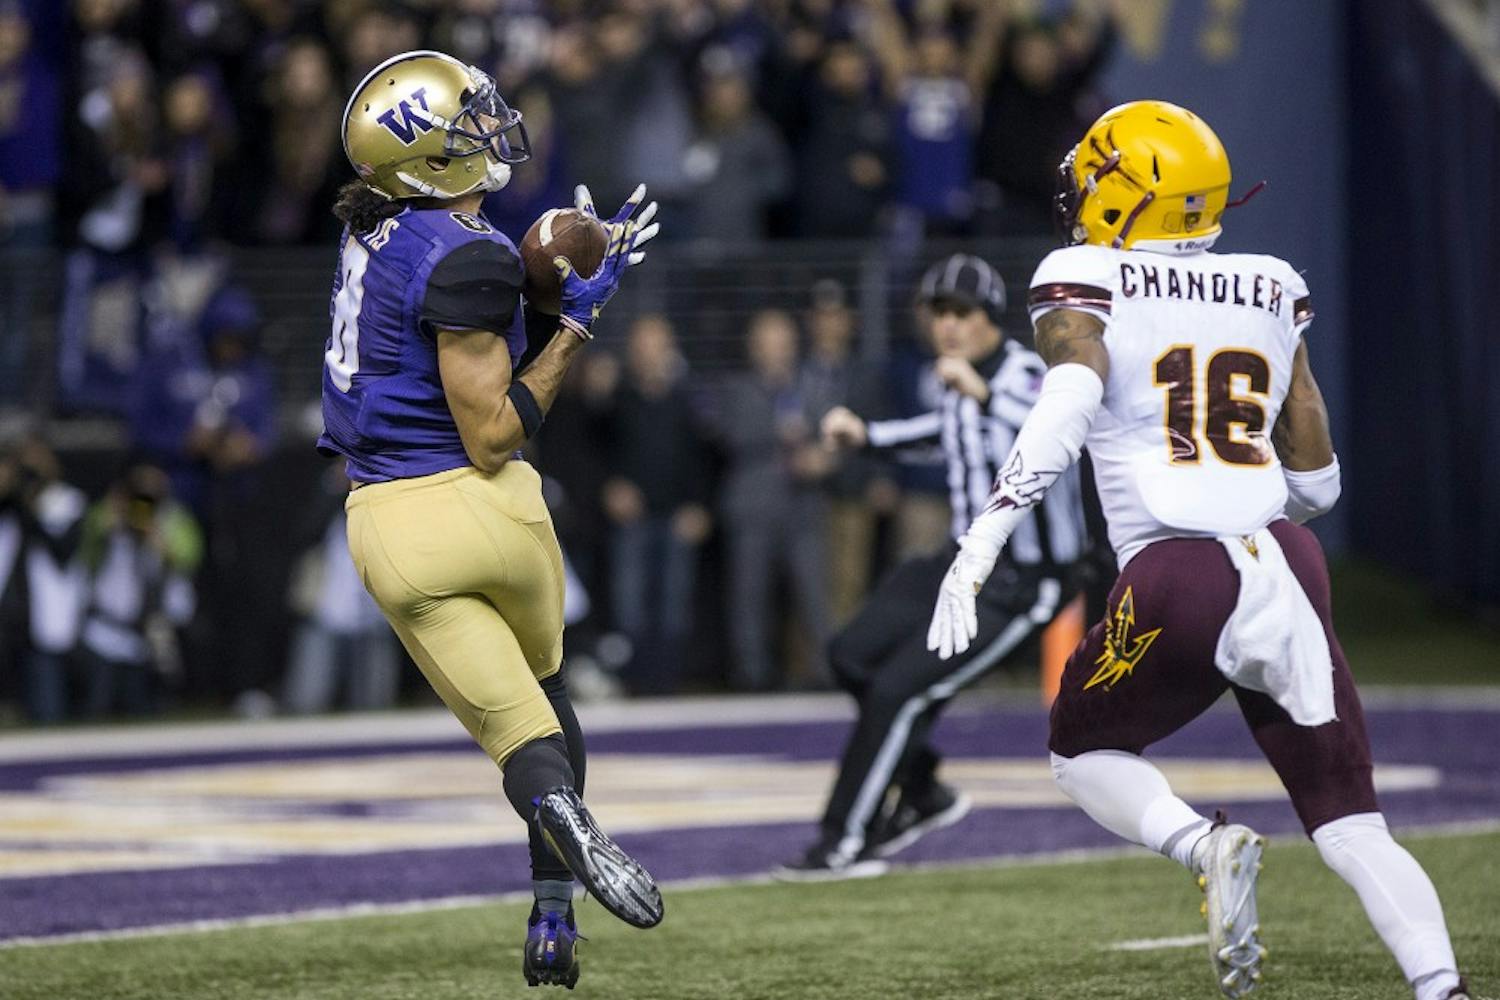 UW wide receiver Dante Pettis pulls in a touchdown pass during a football game against the UW Huskies on Saturday, Nov. 19, 2016, in Husky Stadium in Seattle, Washington. 